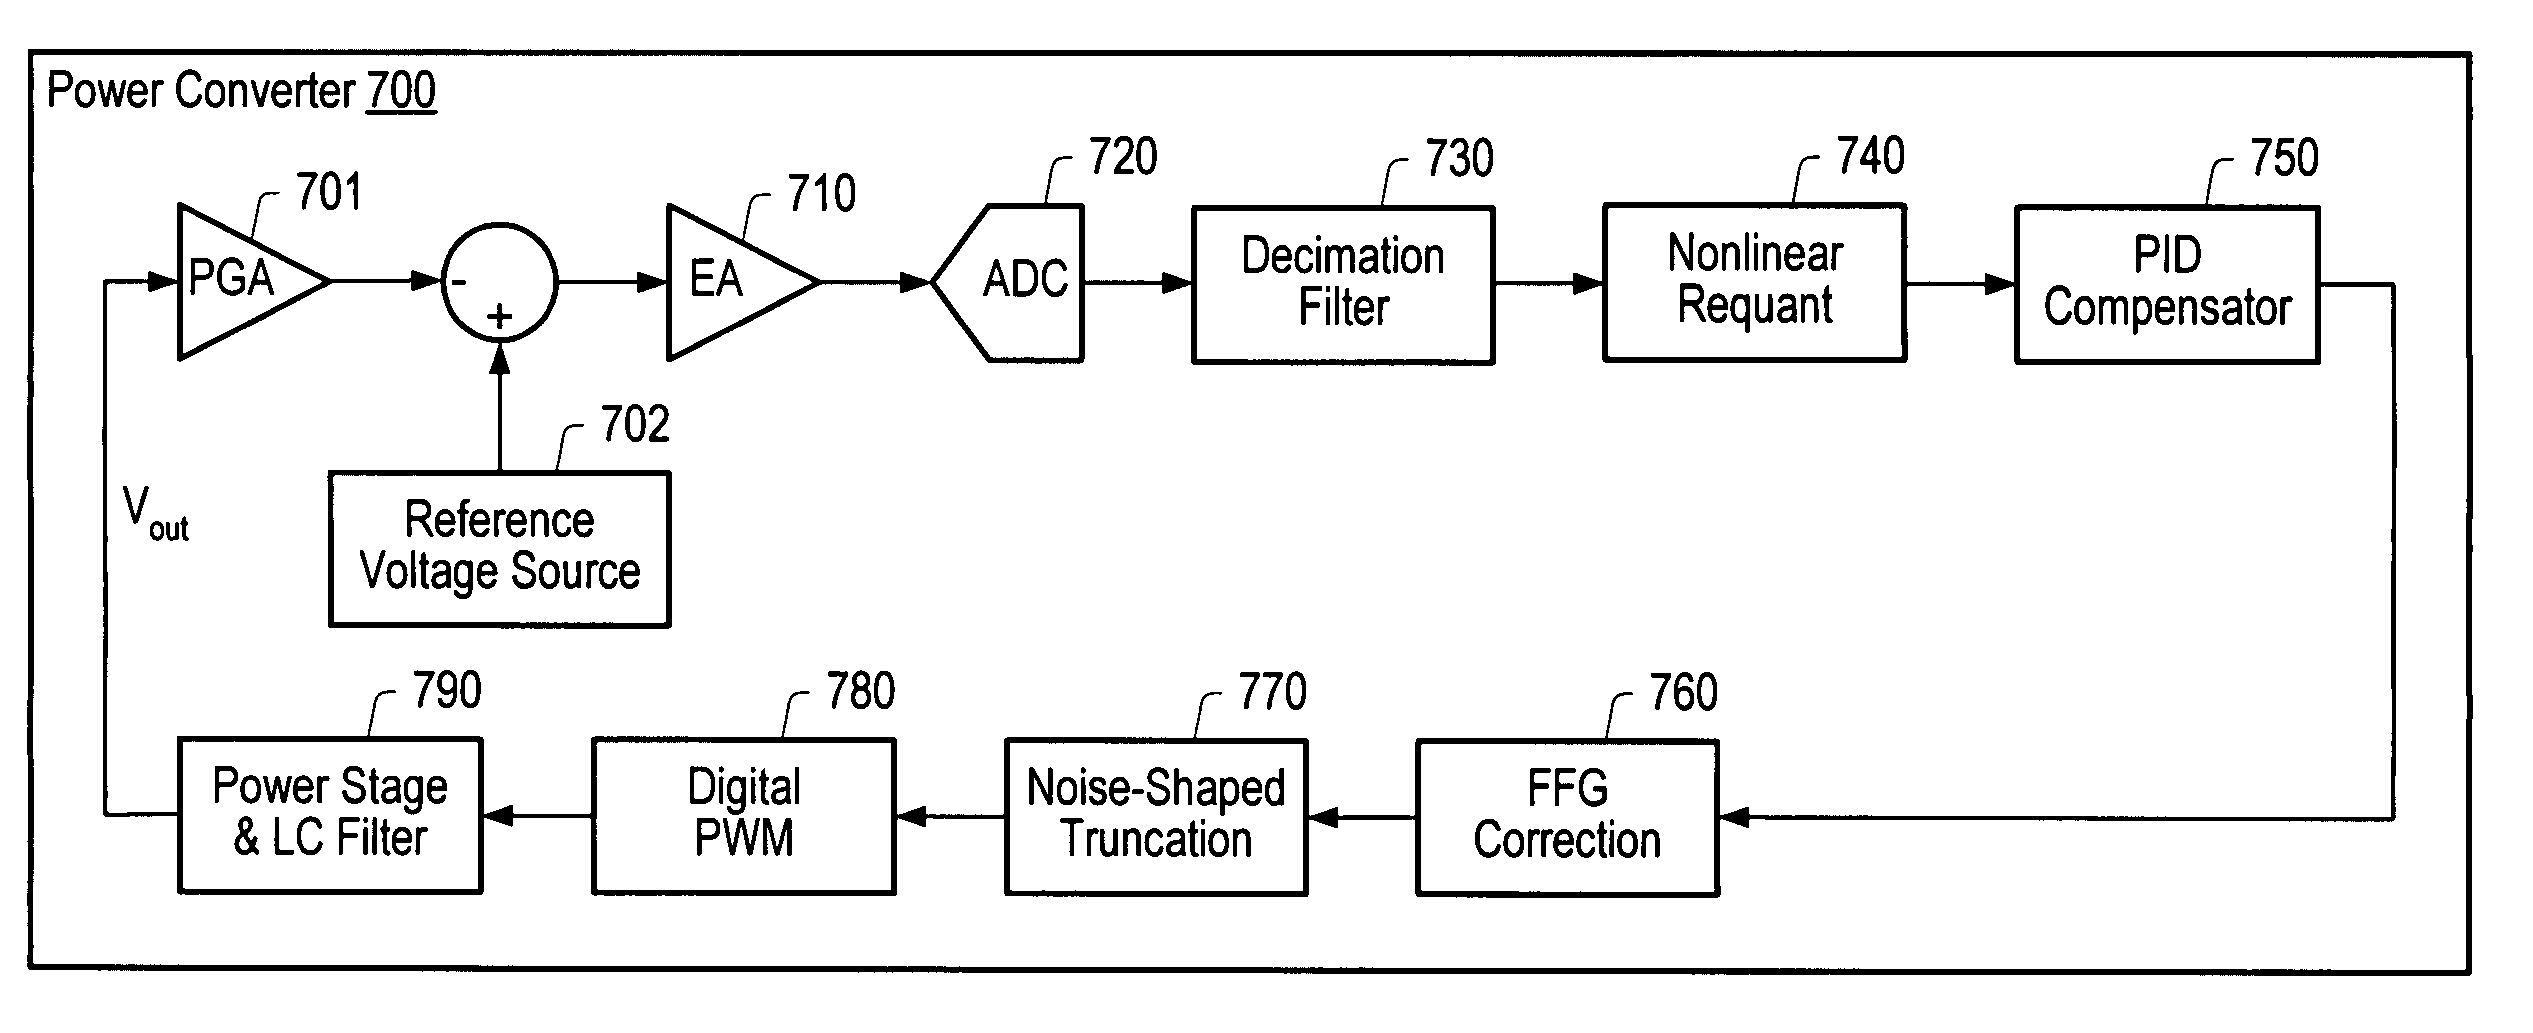 Hardware efficient digital control loop architecture for a power converter